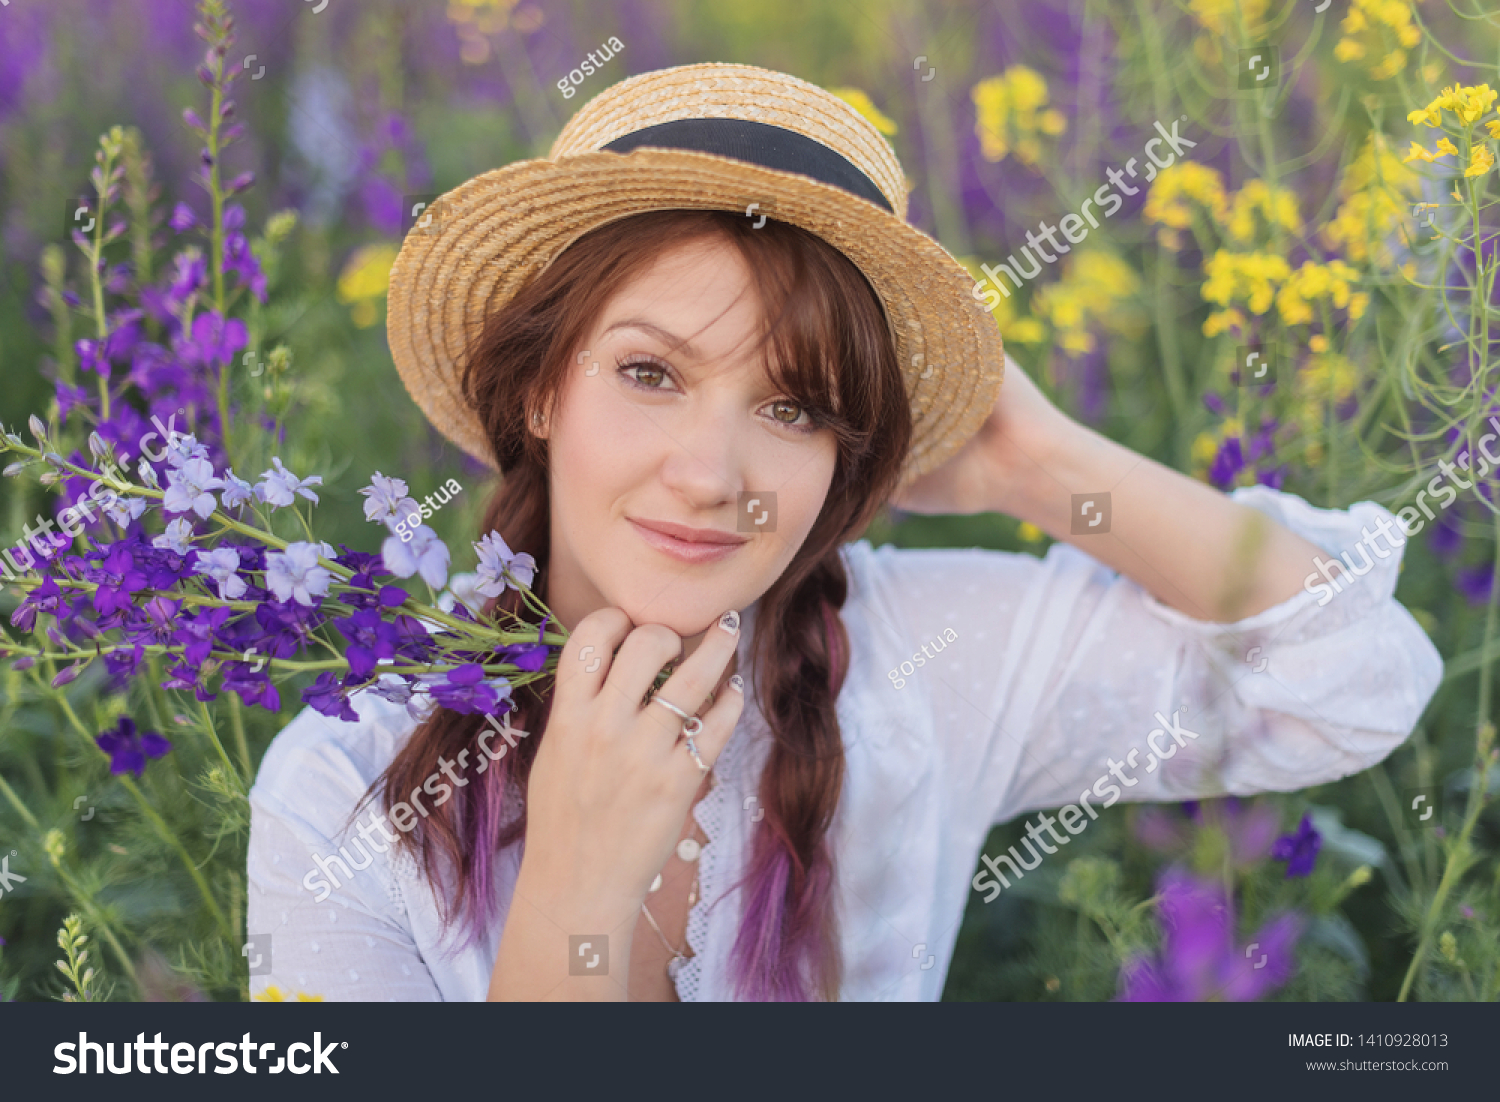 Portrait of a beautiful brunette girl with long hair and pigtails in a straw hat and white dress that holding wild flower in a blossoming field
 #1410928013